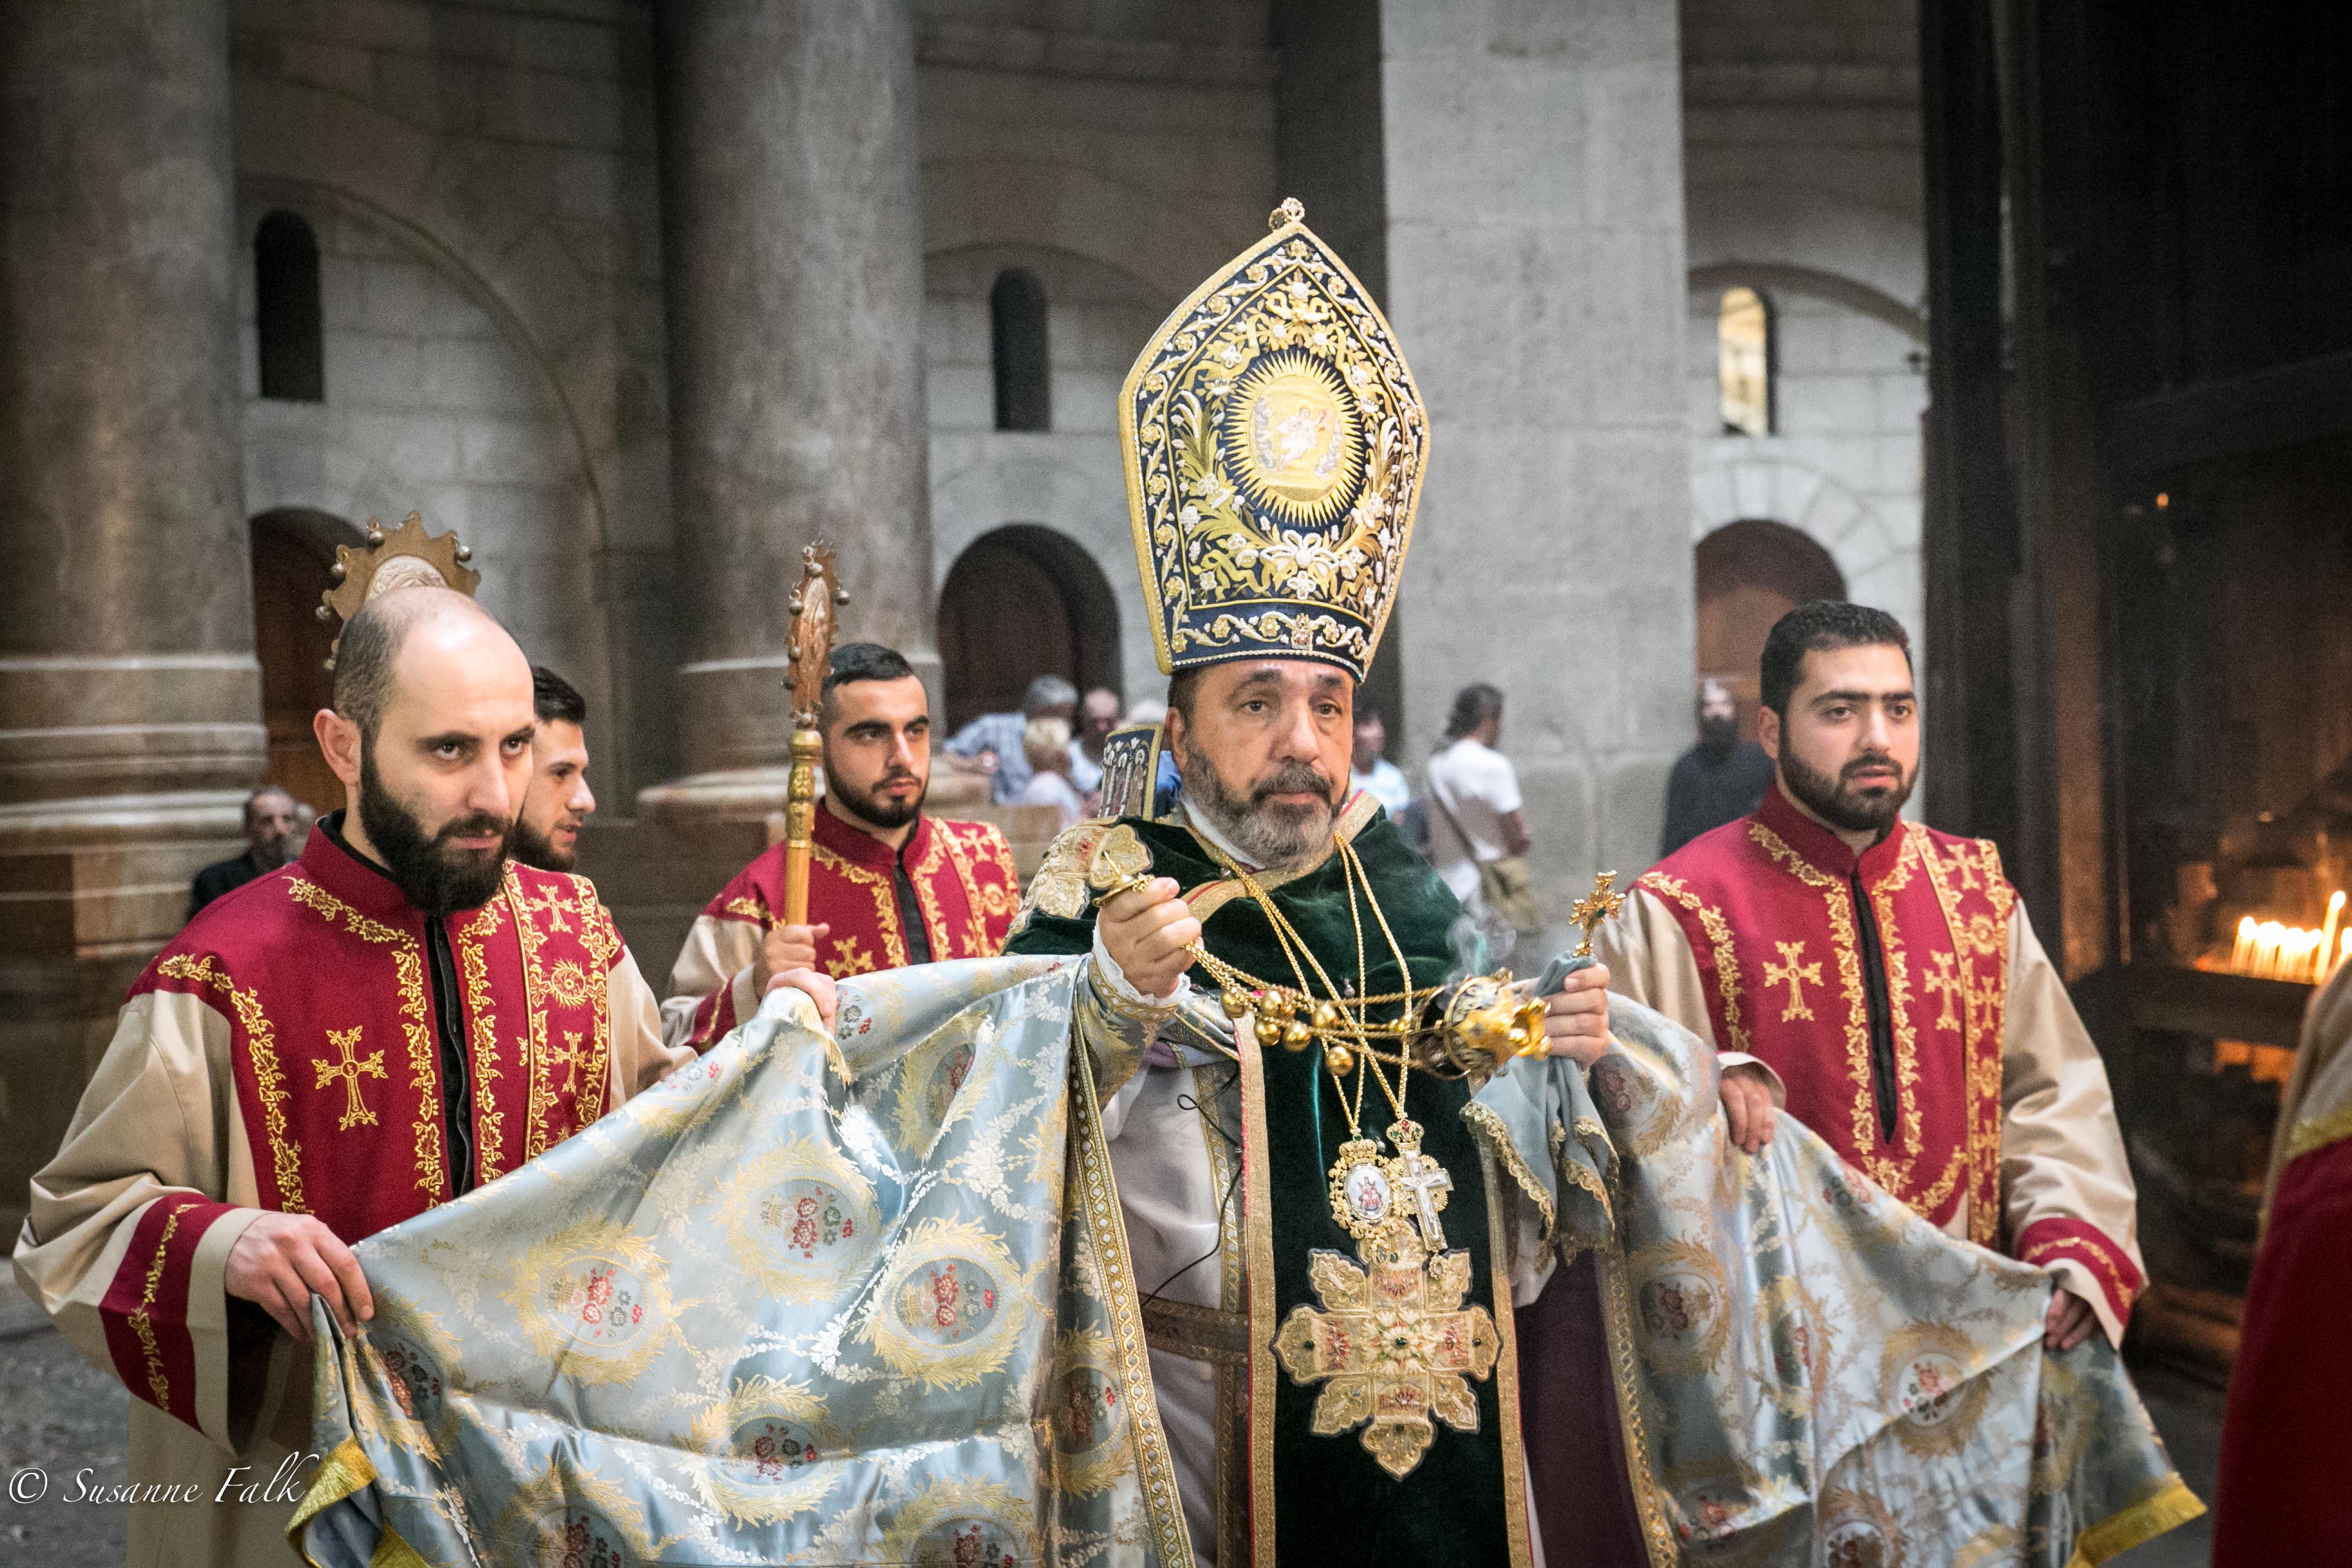 Fifth Anniversary of the enthronement of the Armenian Patriarch of Jerusalem to the Holy See of St. James